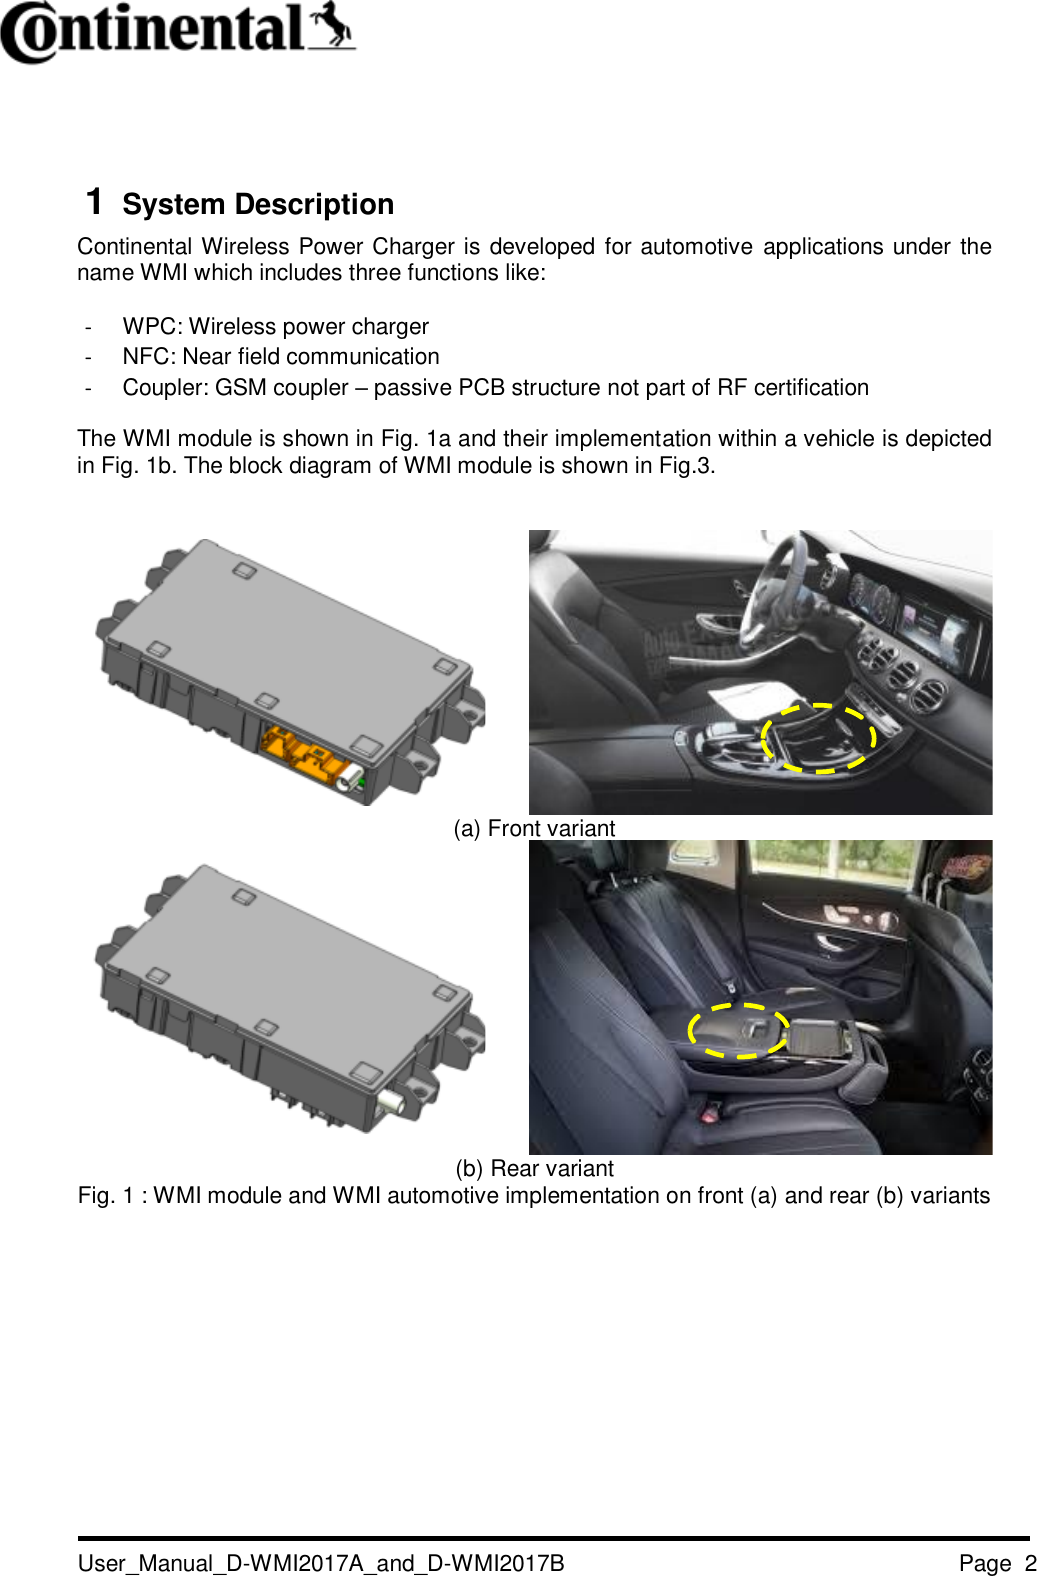   User_Manual_D-WMI2017A_and_D-WMI2017B Page  2    1  System Description Continental Wireless Power Charger is developed for automotive applications under the name WMI which includes three functions like:  - WPC: Wireless power charger - NFC: Near field communication - Coupler: GSM coupler – passive PCB structure not part of RF certification The WMI module is shown in Fig. 1a and their implementation within a vehicle is depicted in Fig. 1b. The block diagram of WMI module is shown in Fig.3.     (a) Front variant   (b) Rear variant Fig. 1 : WMI module and WMI automotive implementation on front (a) and rear (b) variants          